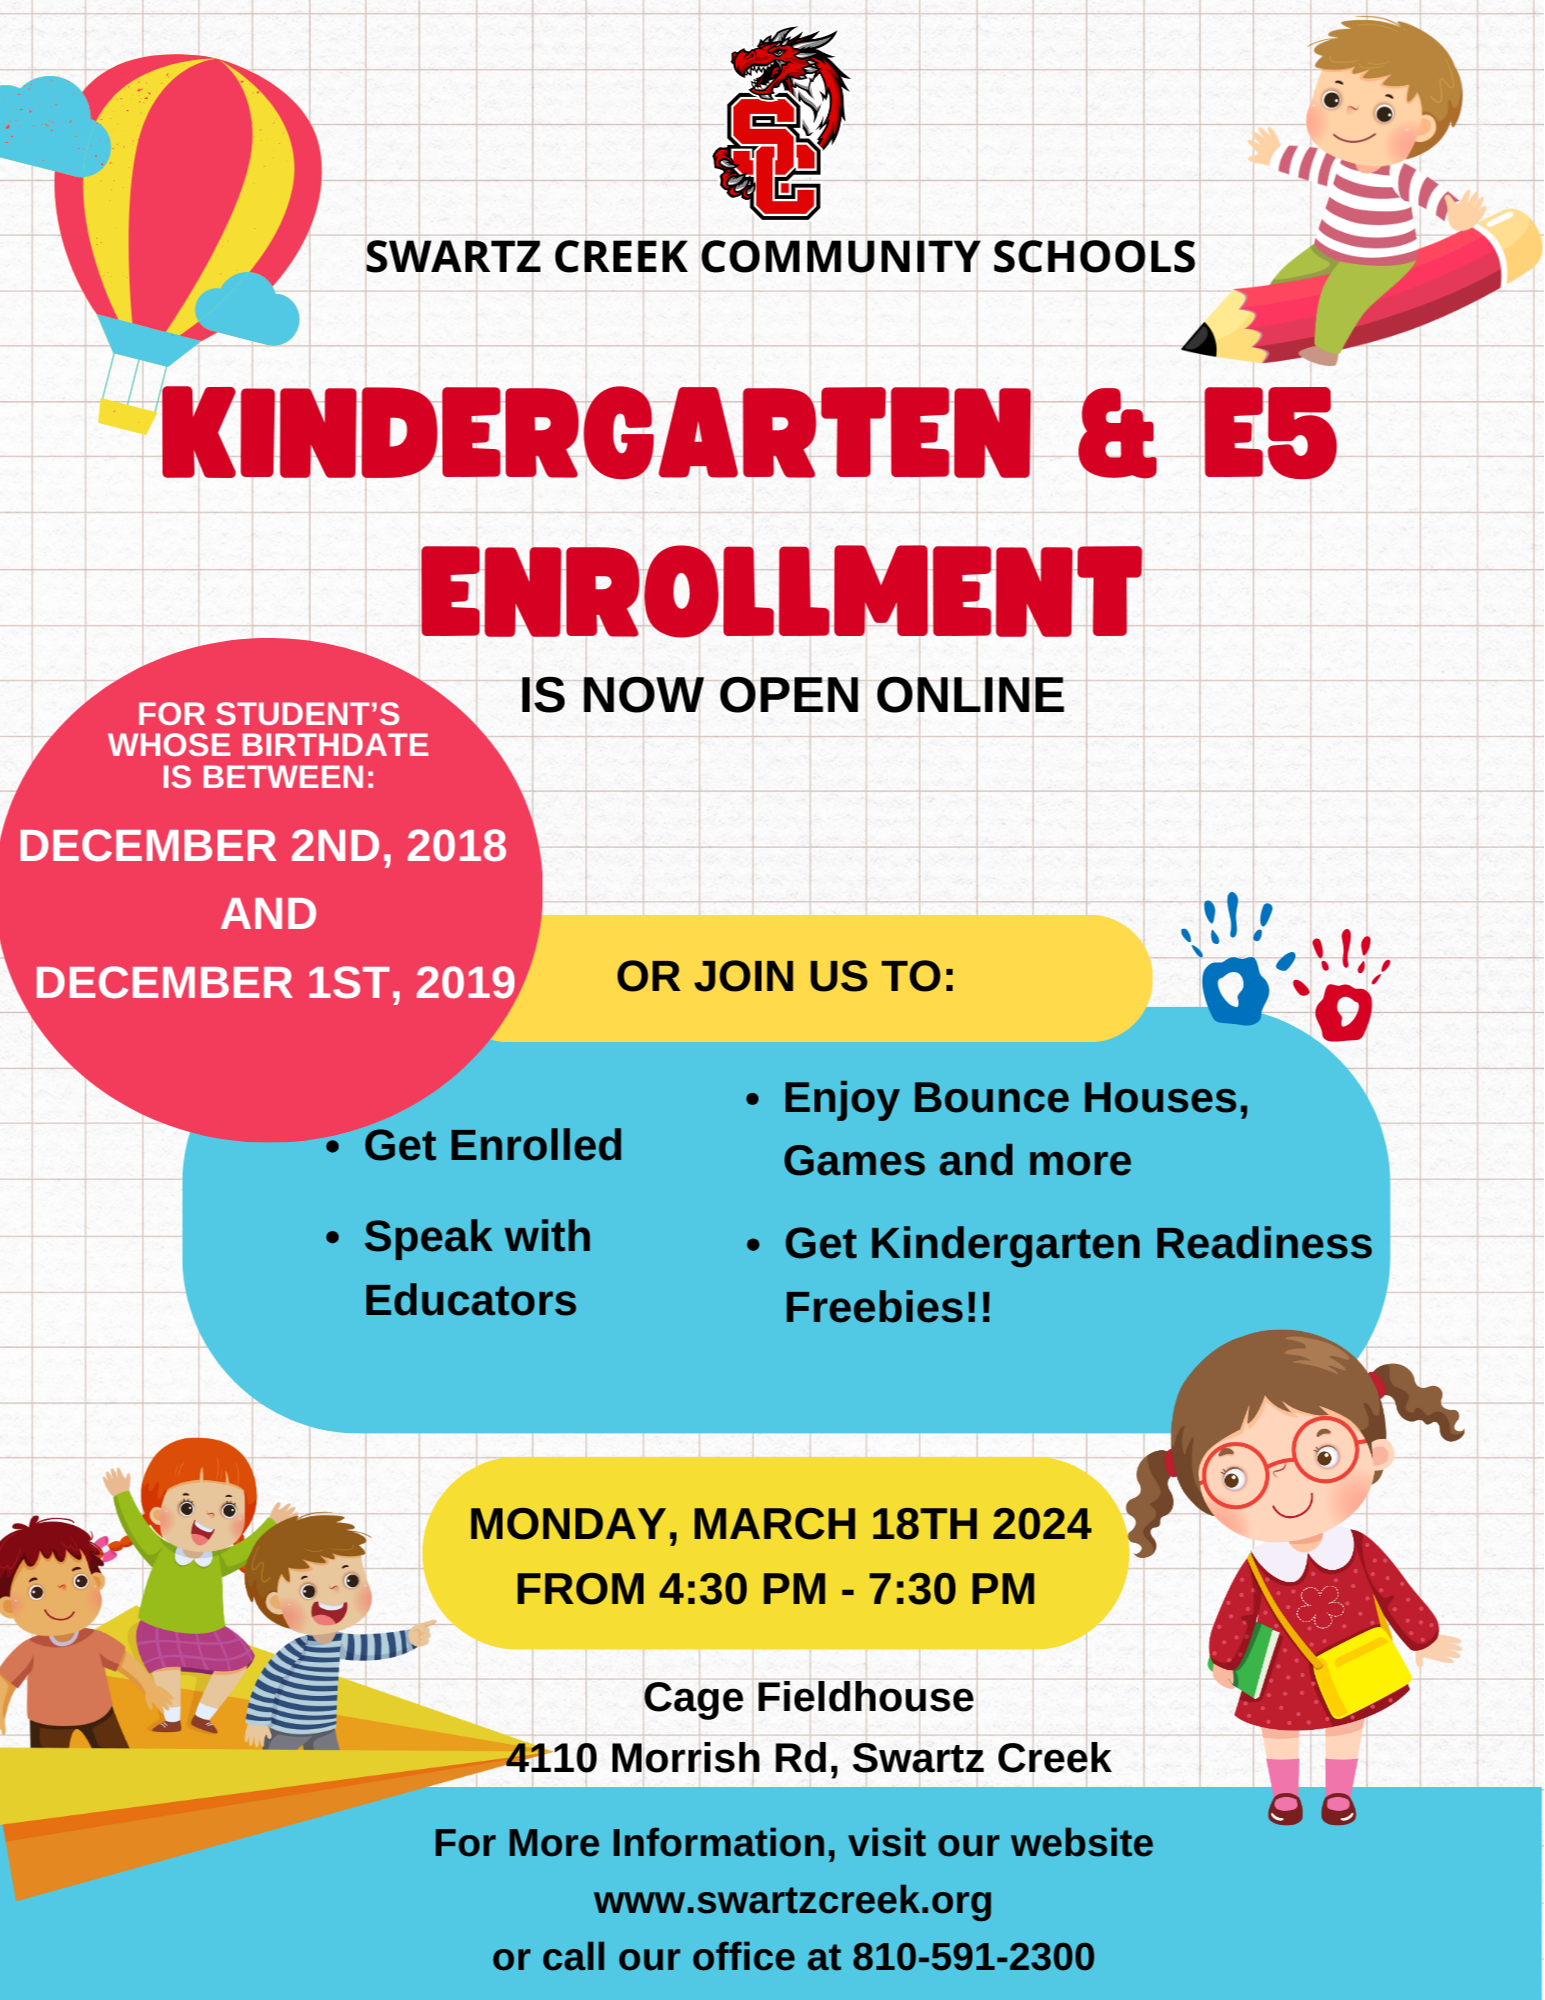   KINDERGARTEN ENROLLMENT FUN NIGHT! APRIL 20, 2023 FROM 4:30 PM - 7:30 PM • Get Enrolled Speak with Educators about Kindergarten Readiness Freebies!! • Bounce houses, games, & more!! Cage Fieldhouse 4110 Morrish Road Swartz Creek لو σ 6